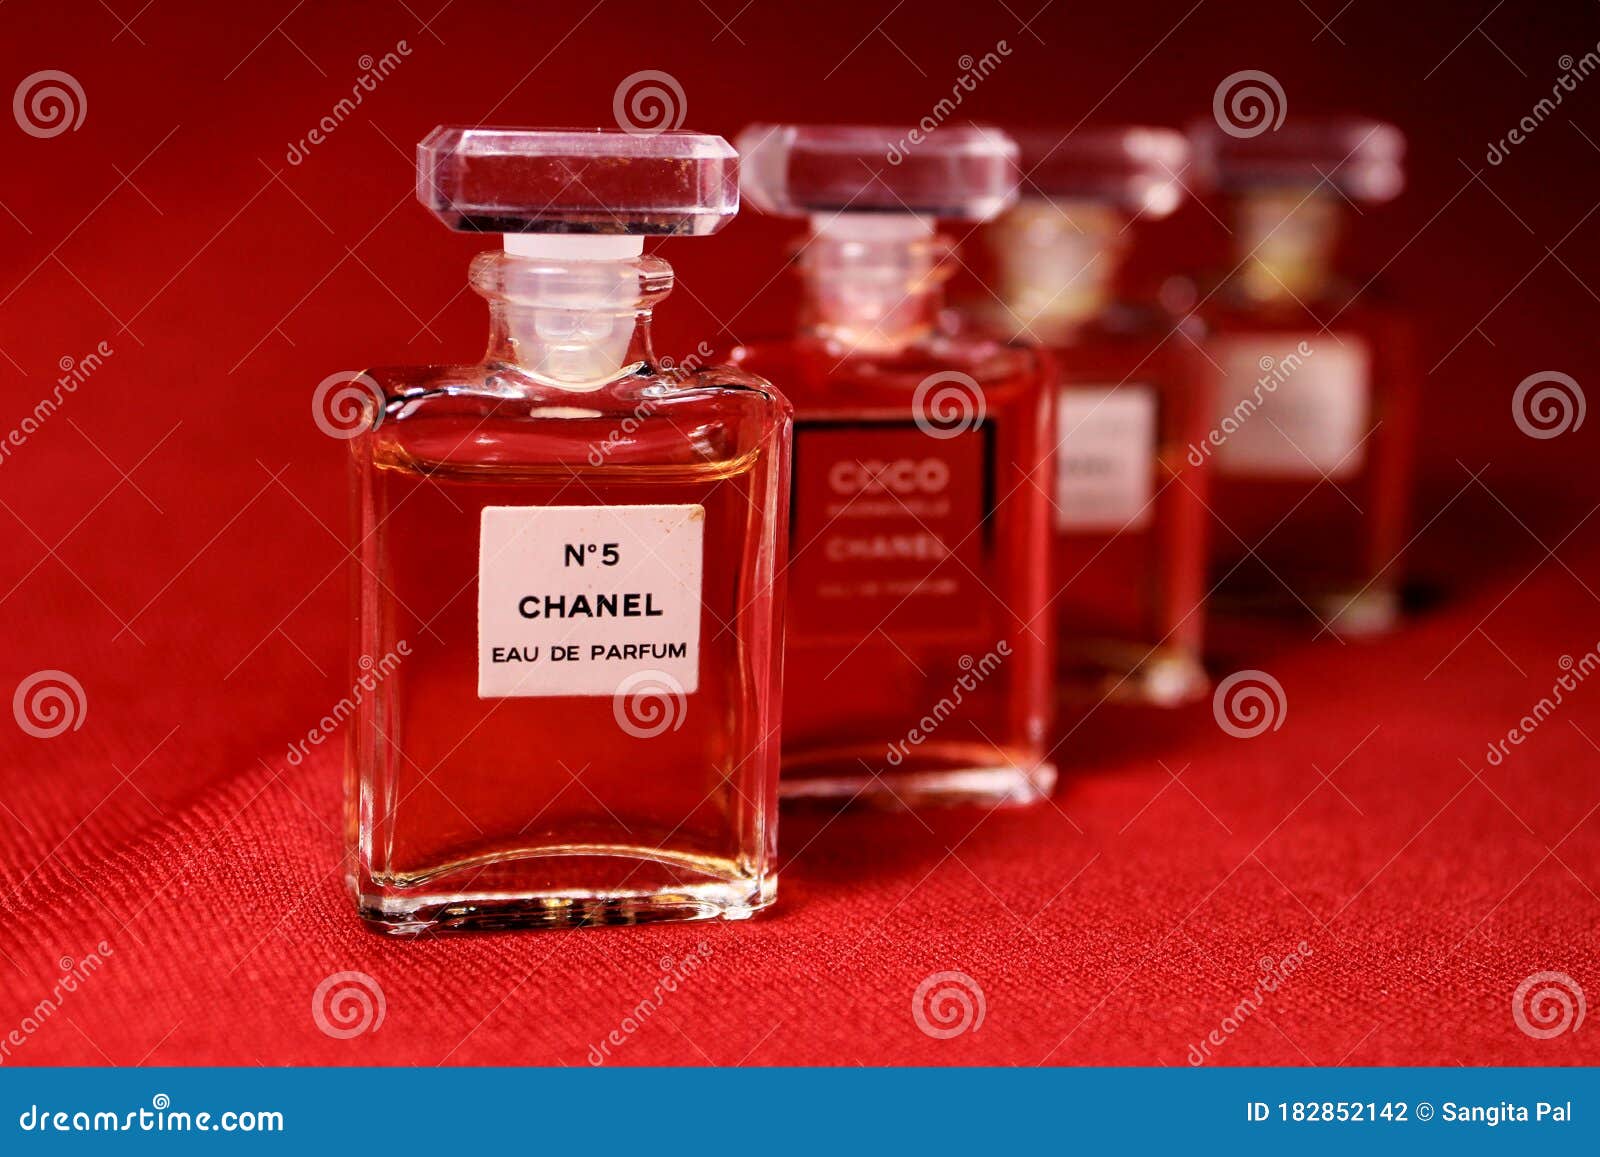 Chanel Perfume Bottles Isolated on Red Background. Bottles with Different  Chanel Perfume Products with Female Accessories Editorial Photography -  Image of fragrance, house: 182852142